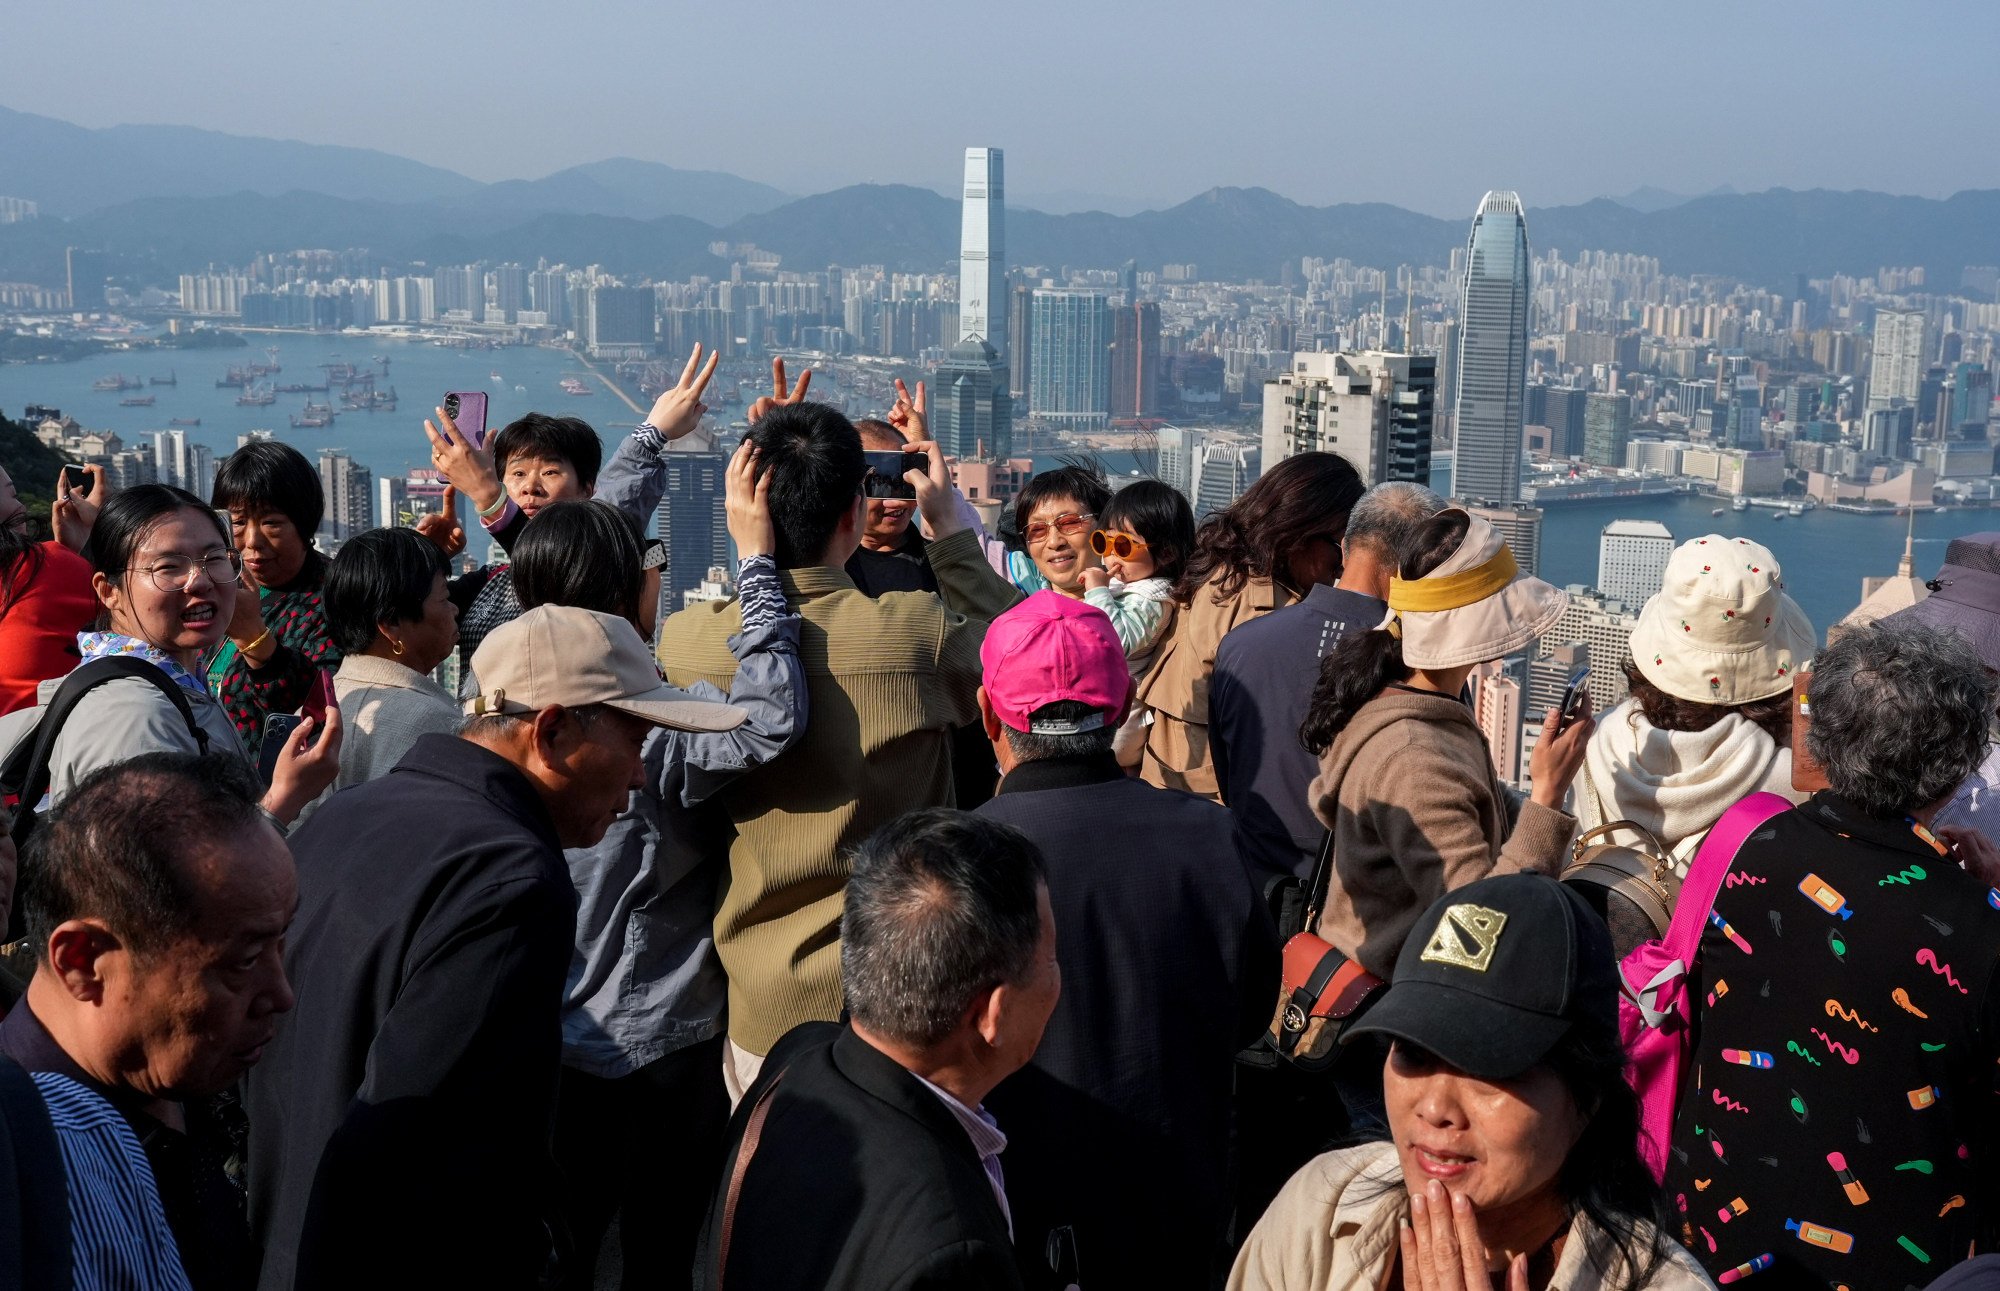 What is drawing tourists to Hong Kong? Koreans seek ‘old city vibes’, Filipinos eye Disneyland and Thais tour temples